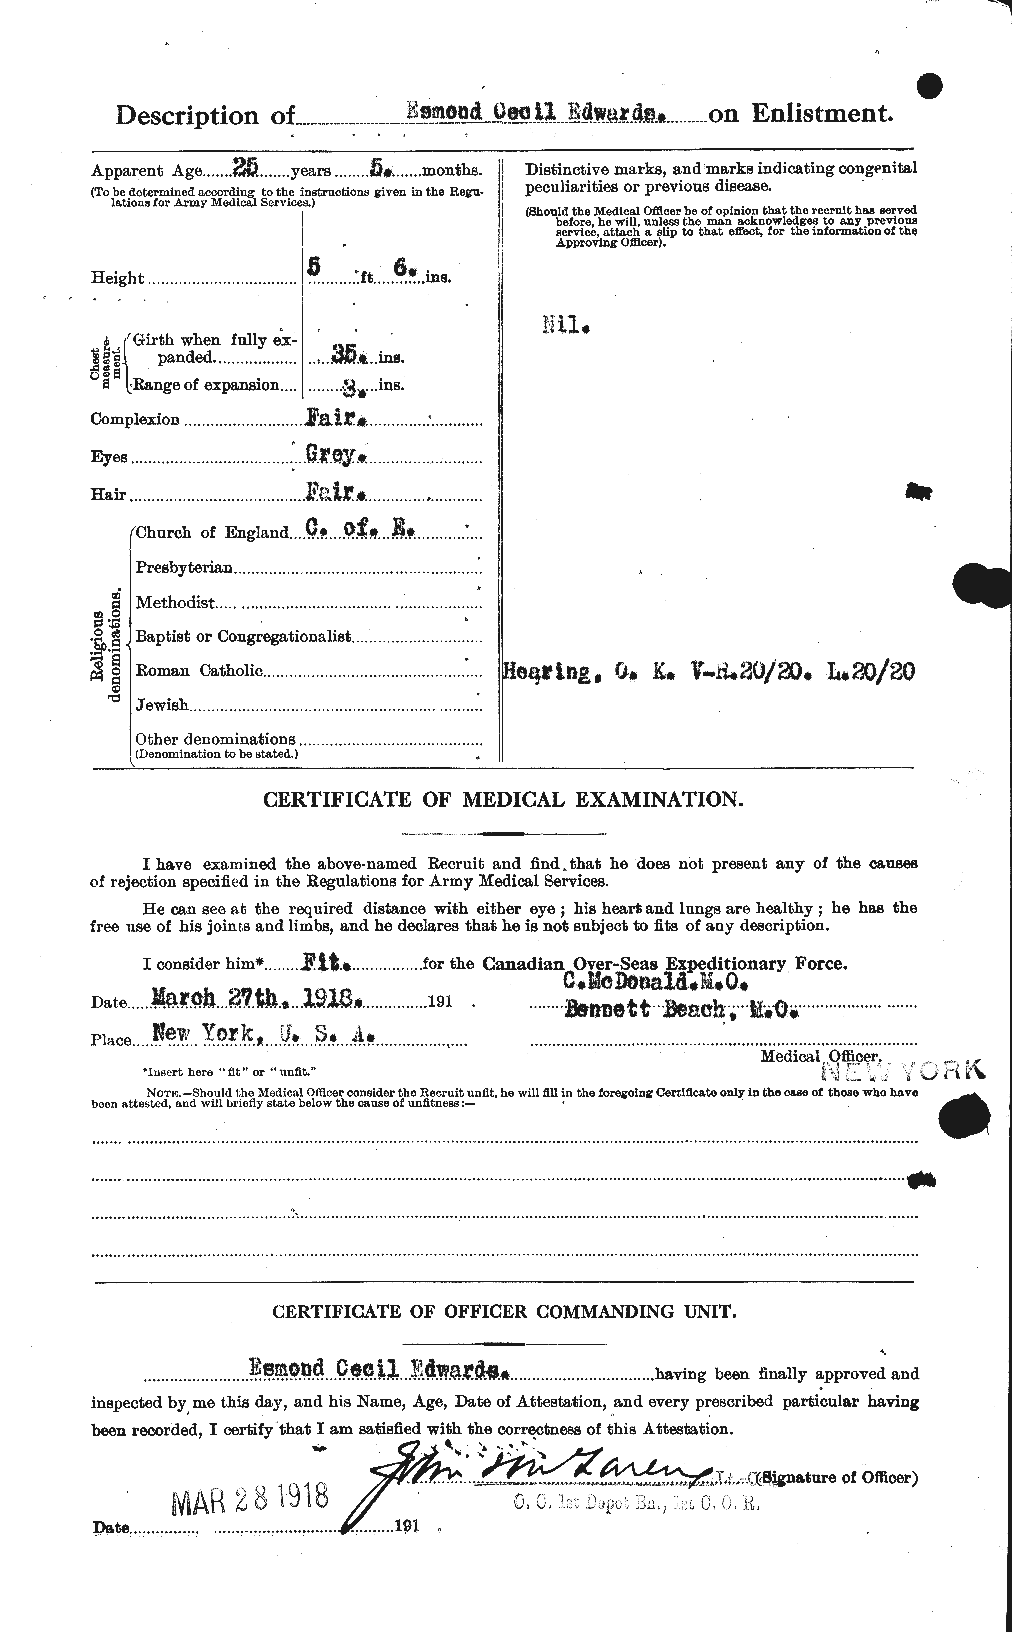 Personnel Records of the First World War - CEF 309019b